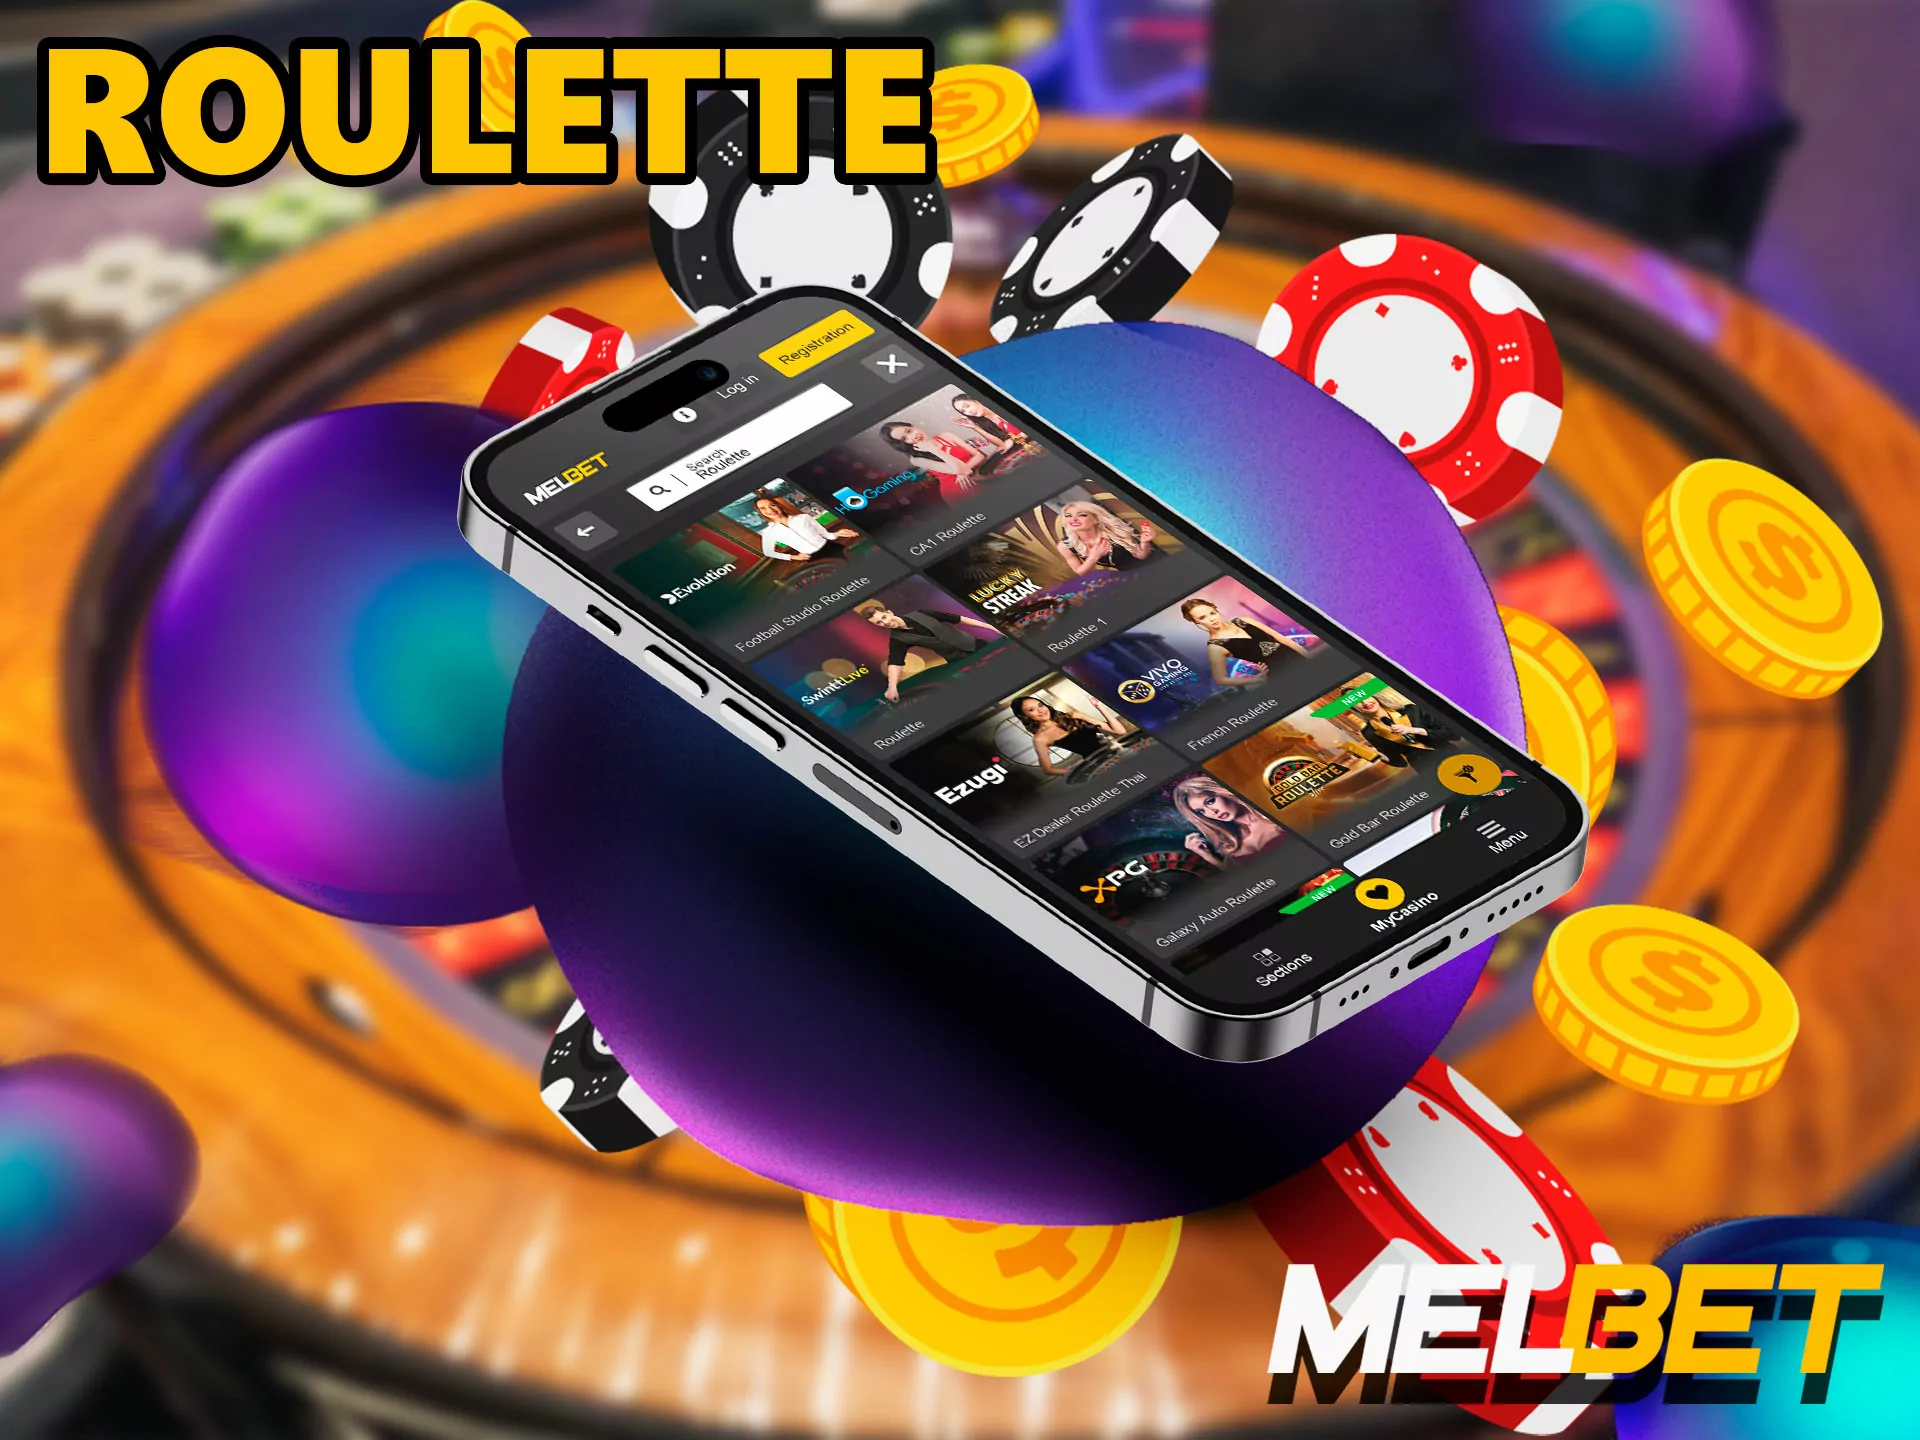 Melbet casino live roulette implies that the gambler bets on the sectors of the wheel, in the future, if the ball stops in front of the guessed sector, the player receives a payout.